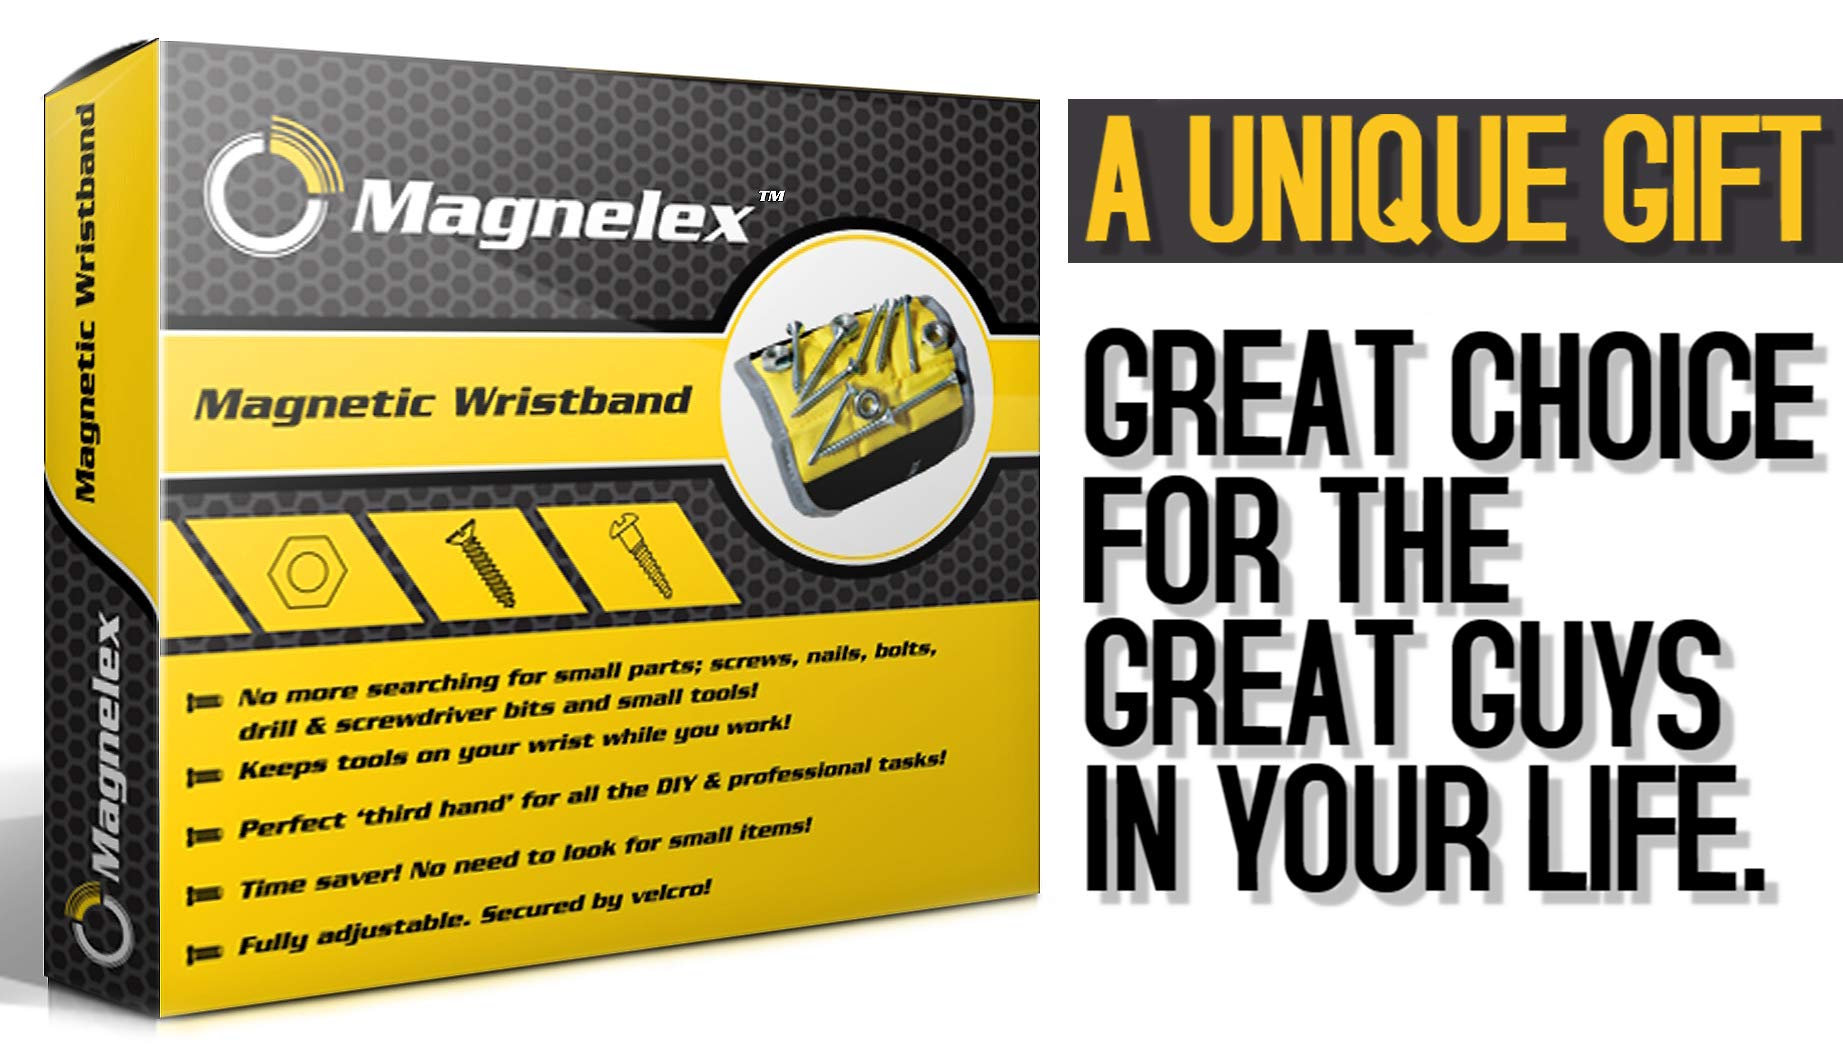 Magnelex Magnetic Wristband for Holding Tools, Screws, Nails, Bolts, Drilling Bits. Unique Gift for Men, Father/Dad, Husband, Boyfriend, Handyman. Gift for Christmas. Unique Gift Idea - $20.95